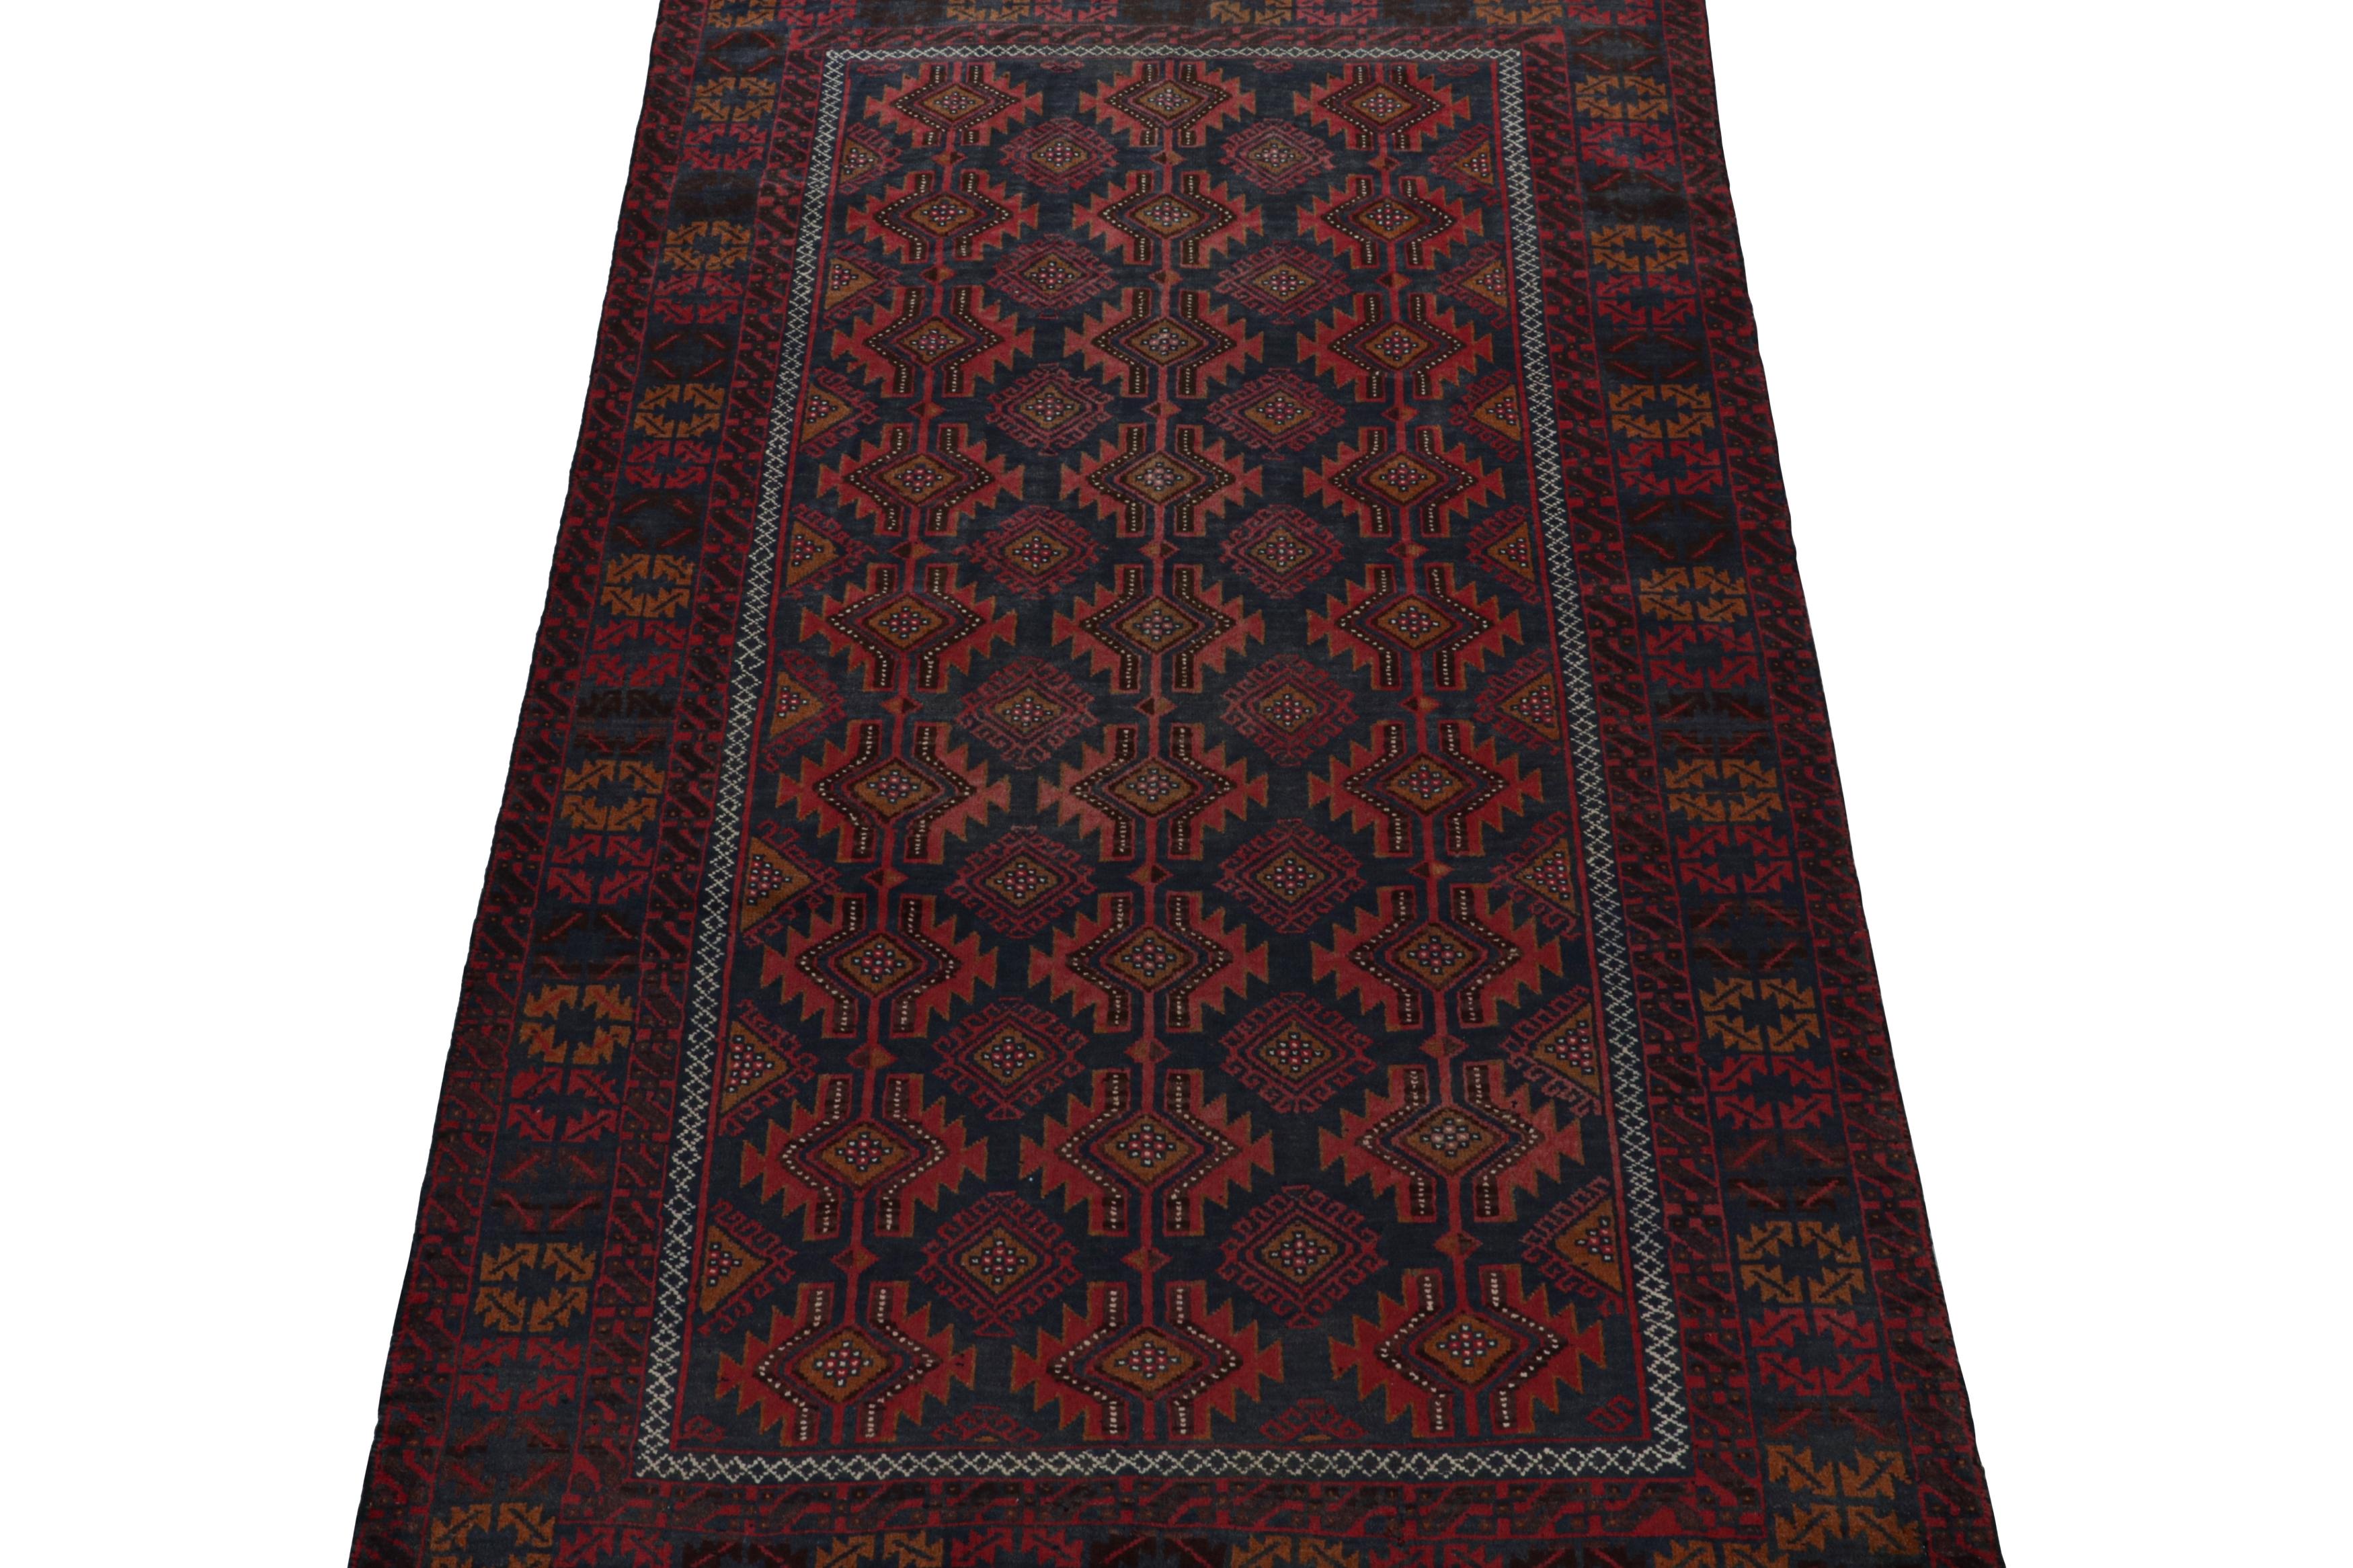 Hand-knotted in wool, this 4x6 Baluch Persian rug of the 1950s is the latest to enter Rug & Kilim’s Antique & Vintage collection.

On the Design:

The piece boasts a refined movement with tribal patterns in rich tones of red & brown on blue. The